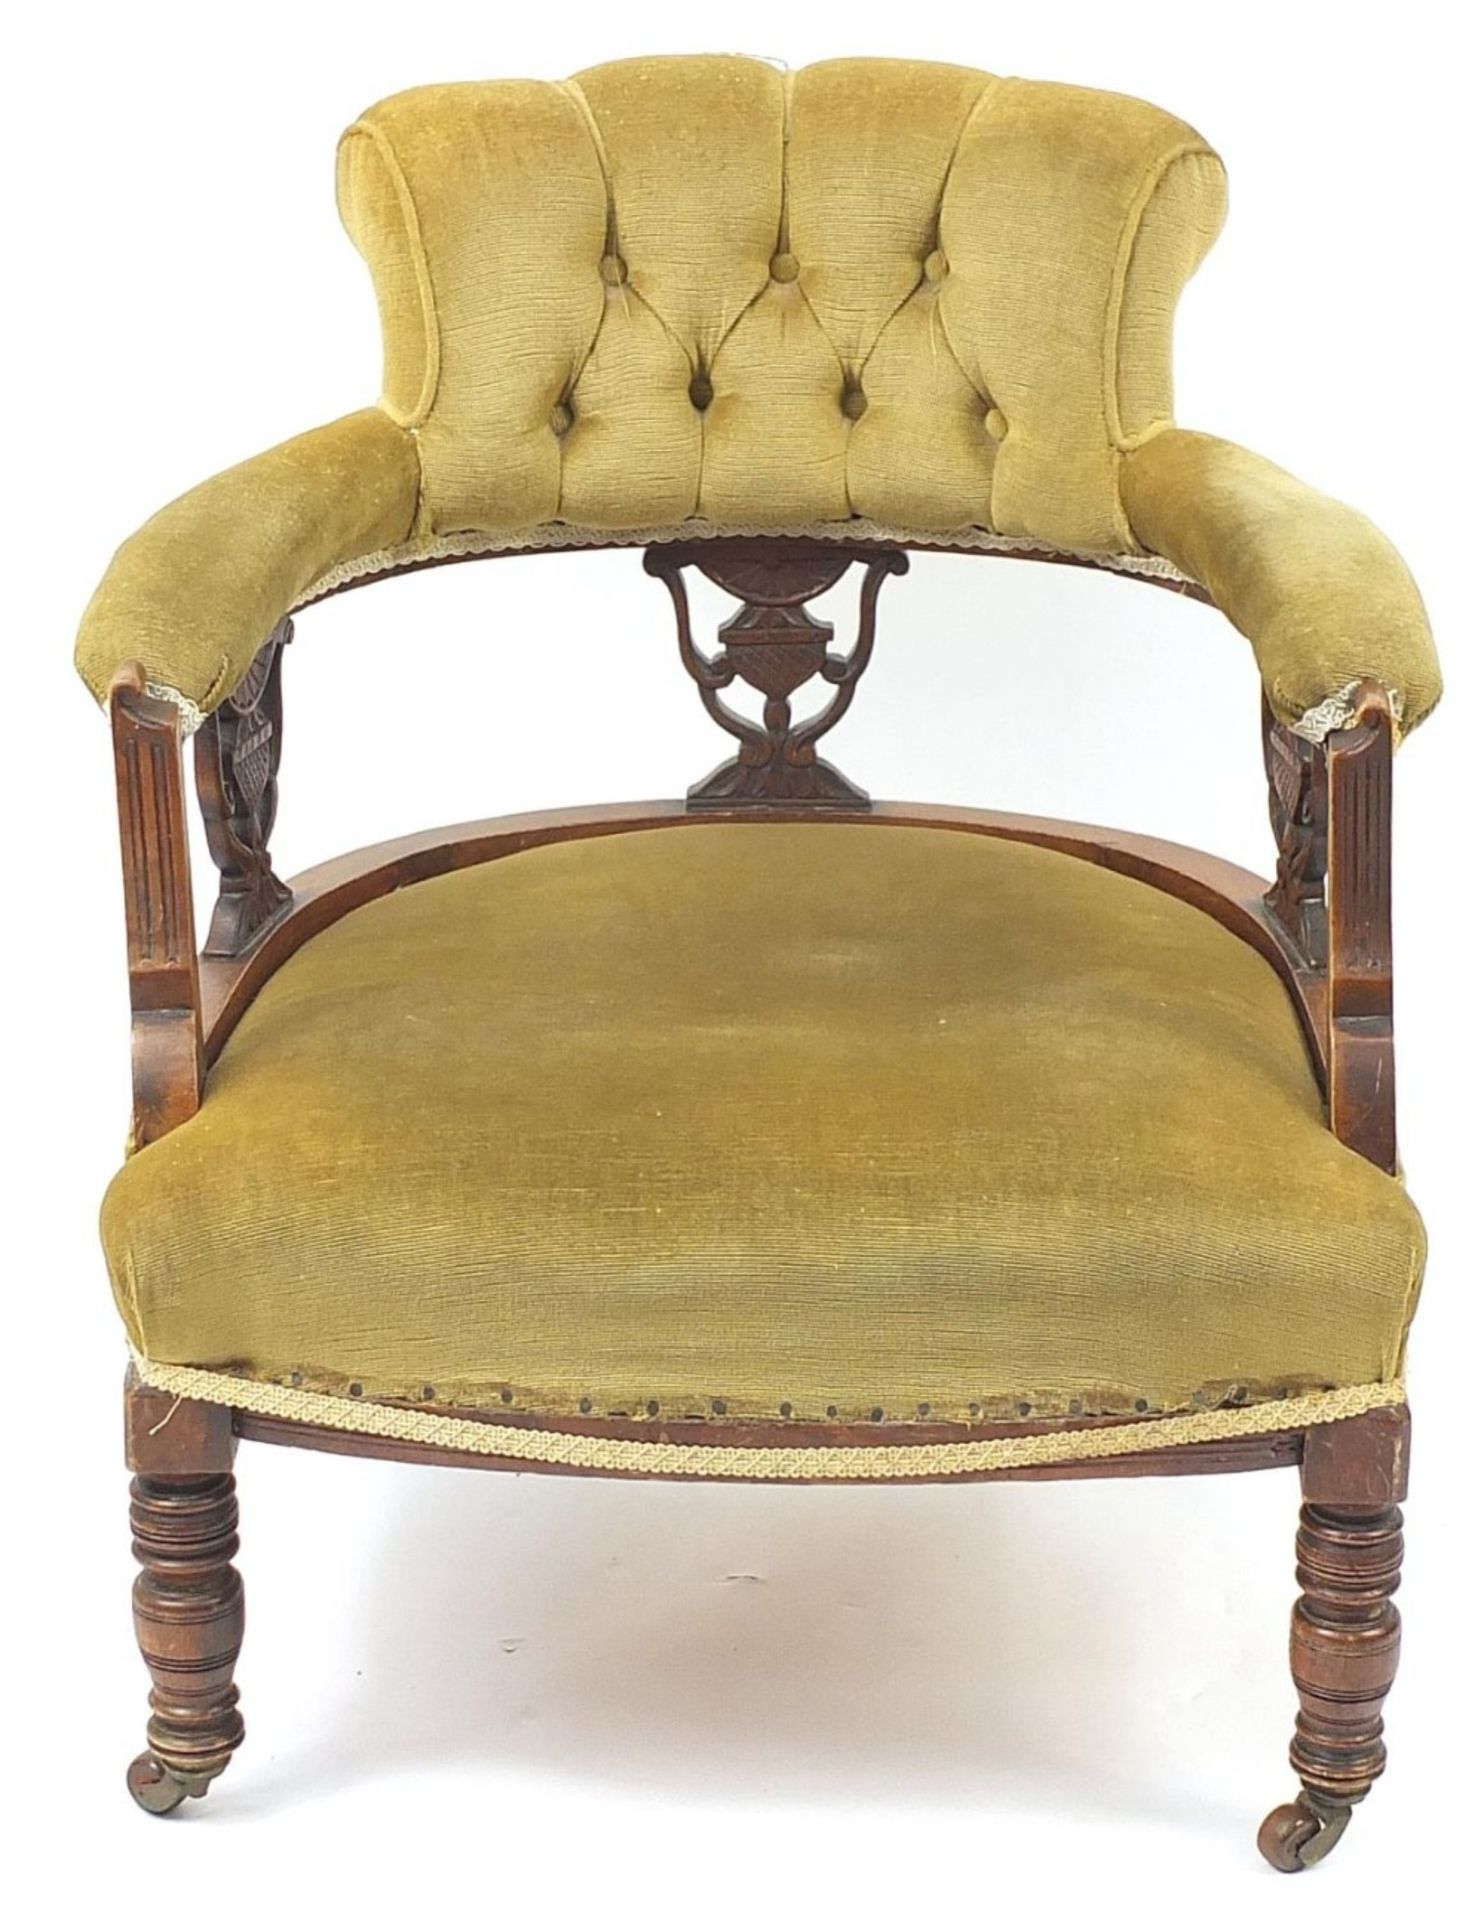 Edwardian carved mahogany bedroom chair with green button back upholstery, 75cm H x 60cm W x 62cm - Image 2 of 4